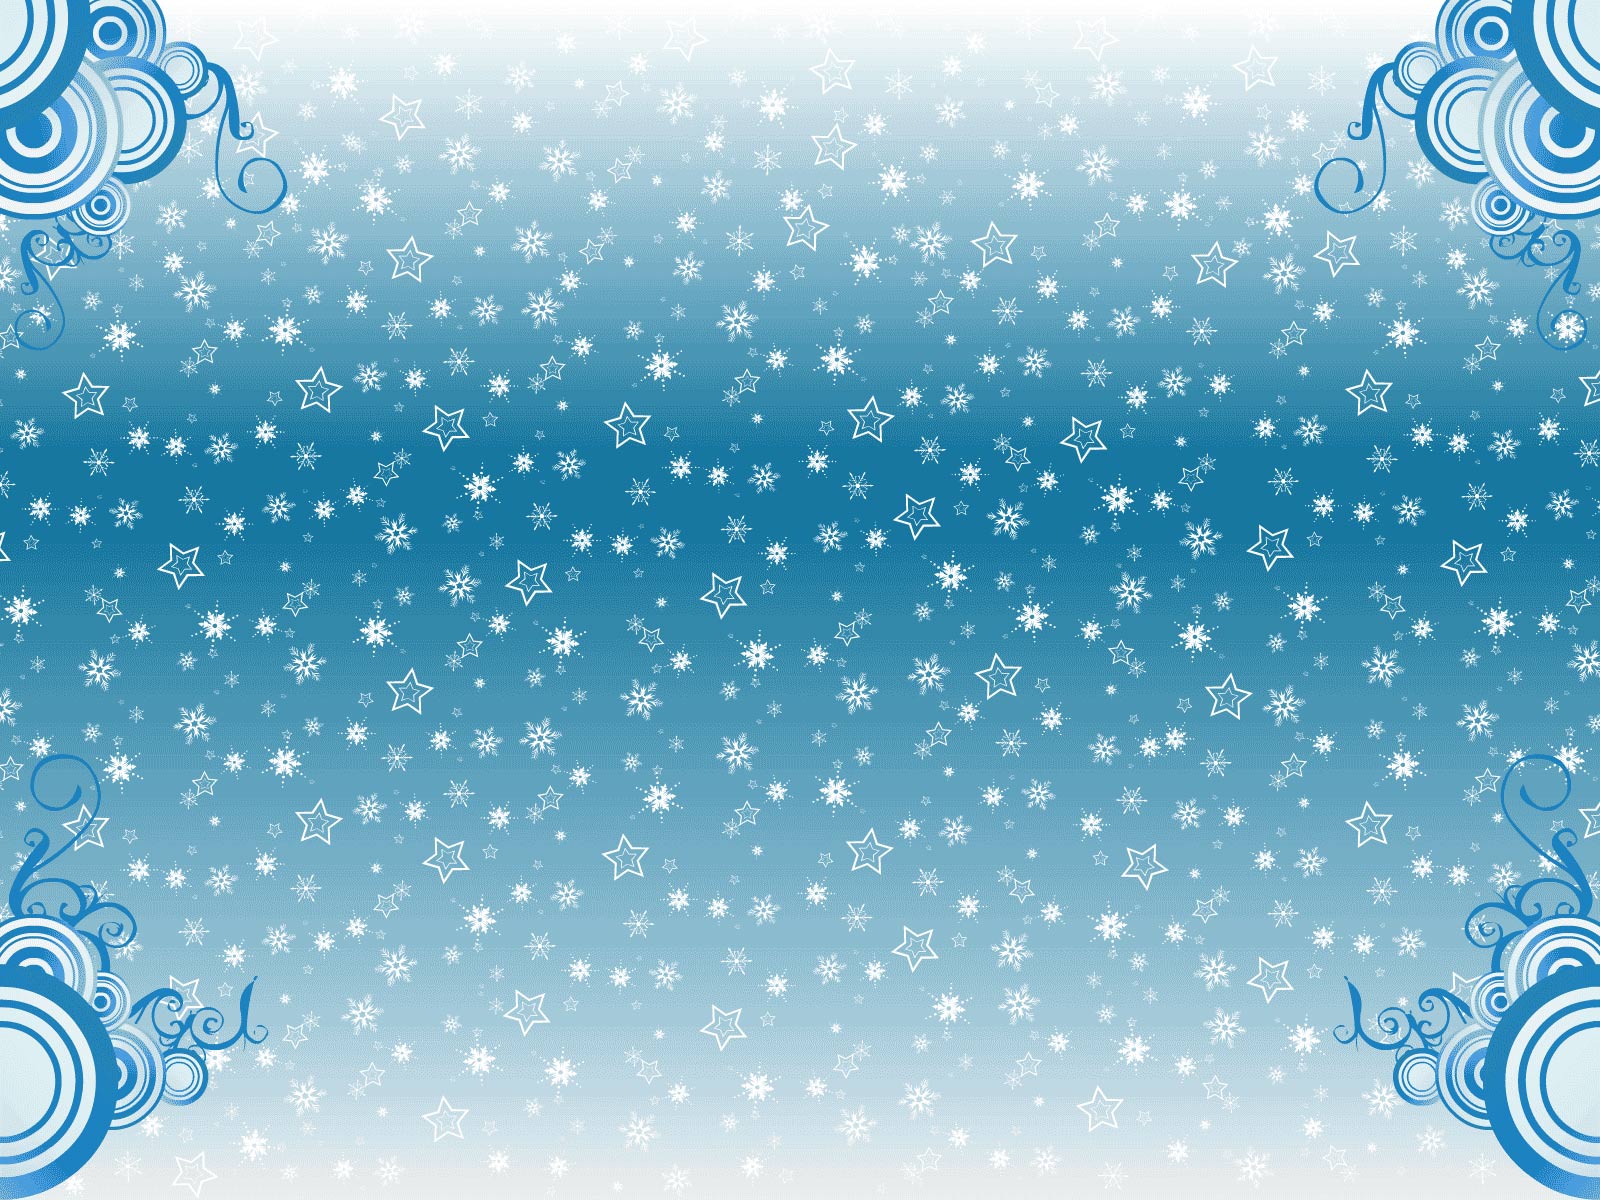 Background Winter Desktop Wallpaper And Make This For Your